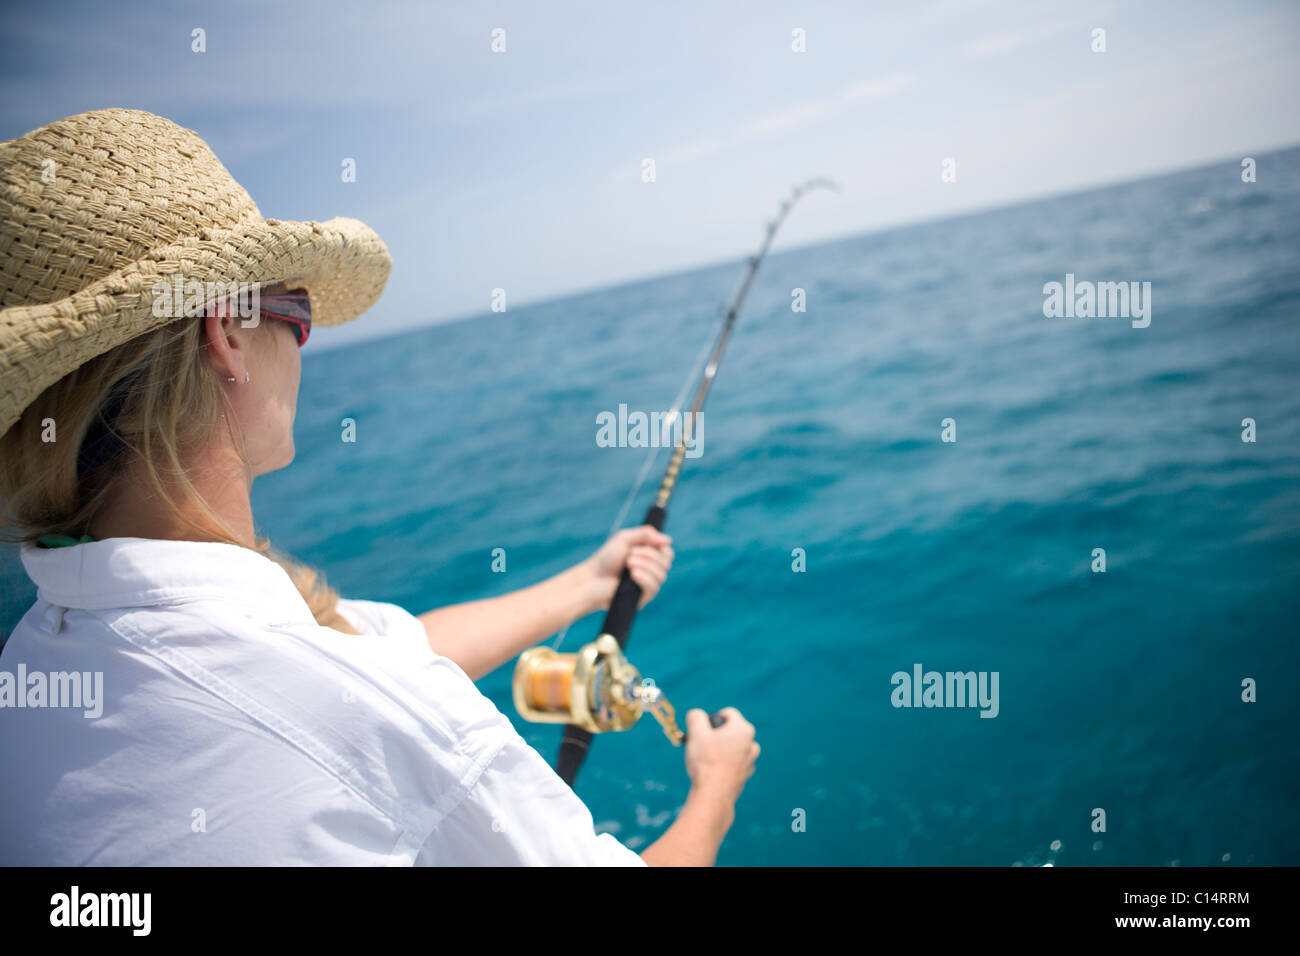 A blonde woman in a straw hat reels in a fish with blue wanter in the distance. Stock Photo